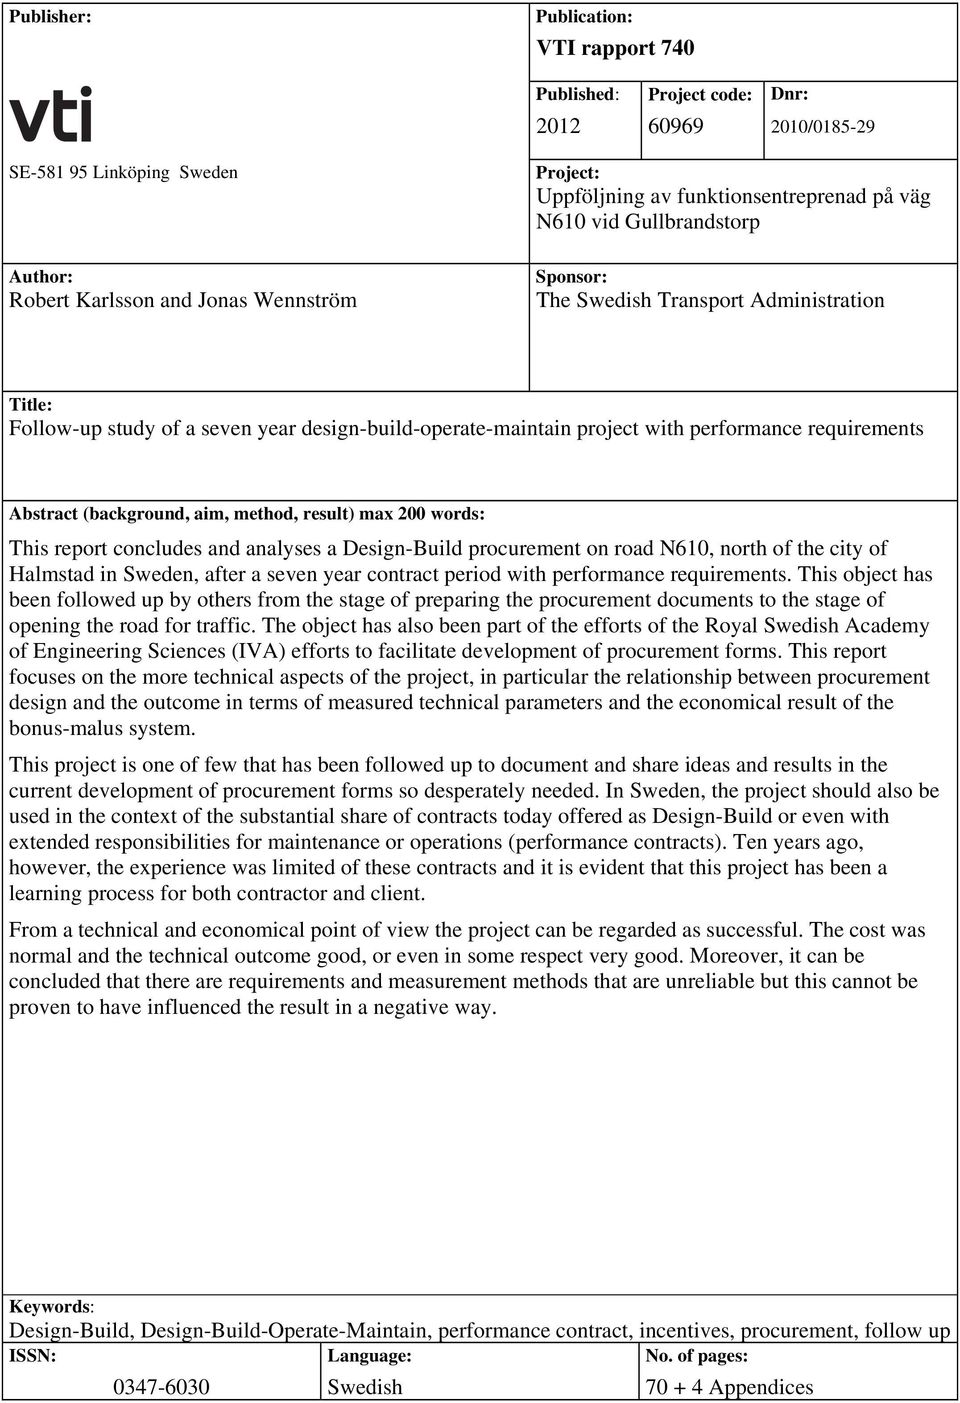 requirements Abstract (background, aim, method, result) max 200 words: This report concludes and analyses a Design-Build procurement on road N610, north of the city of Halmstad in Sweden, after a